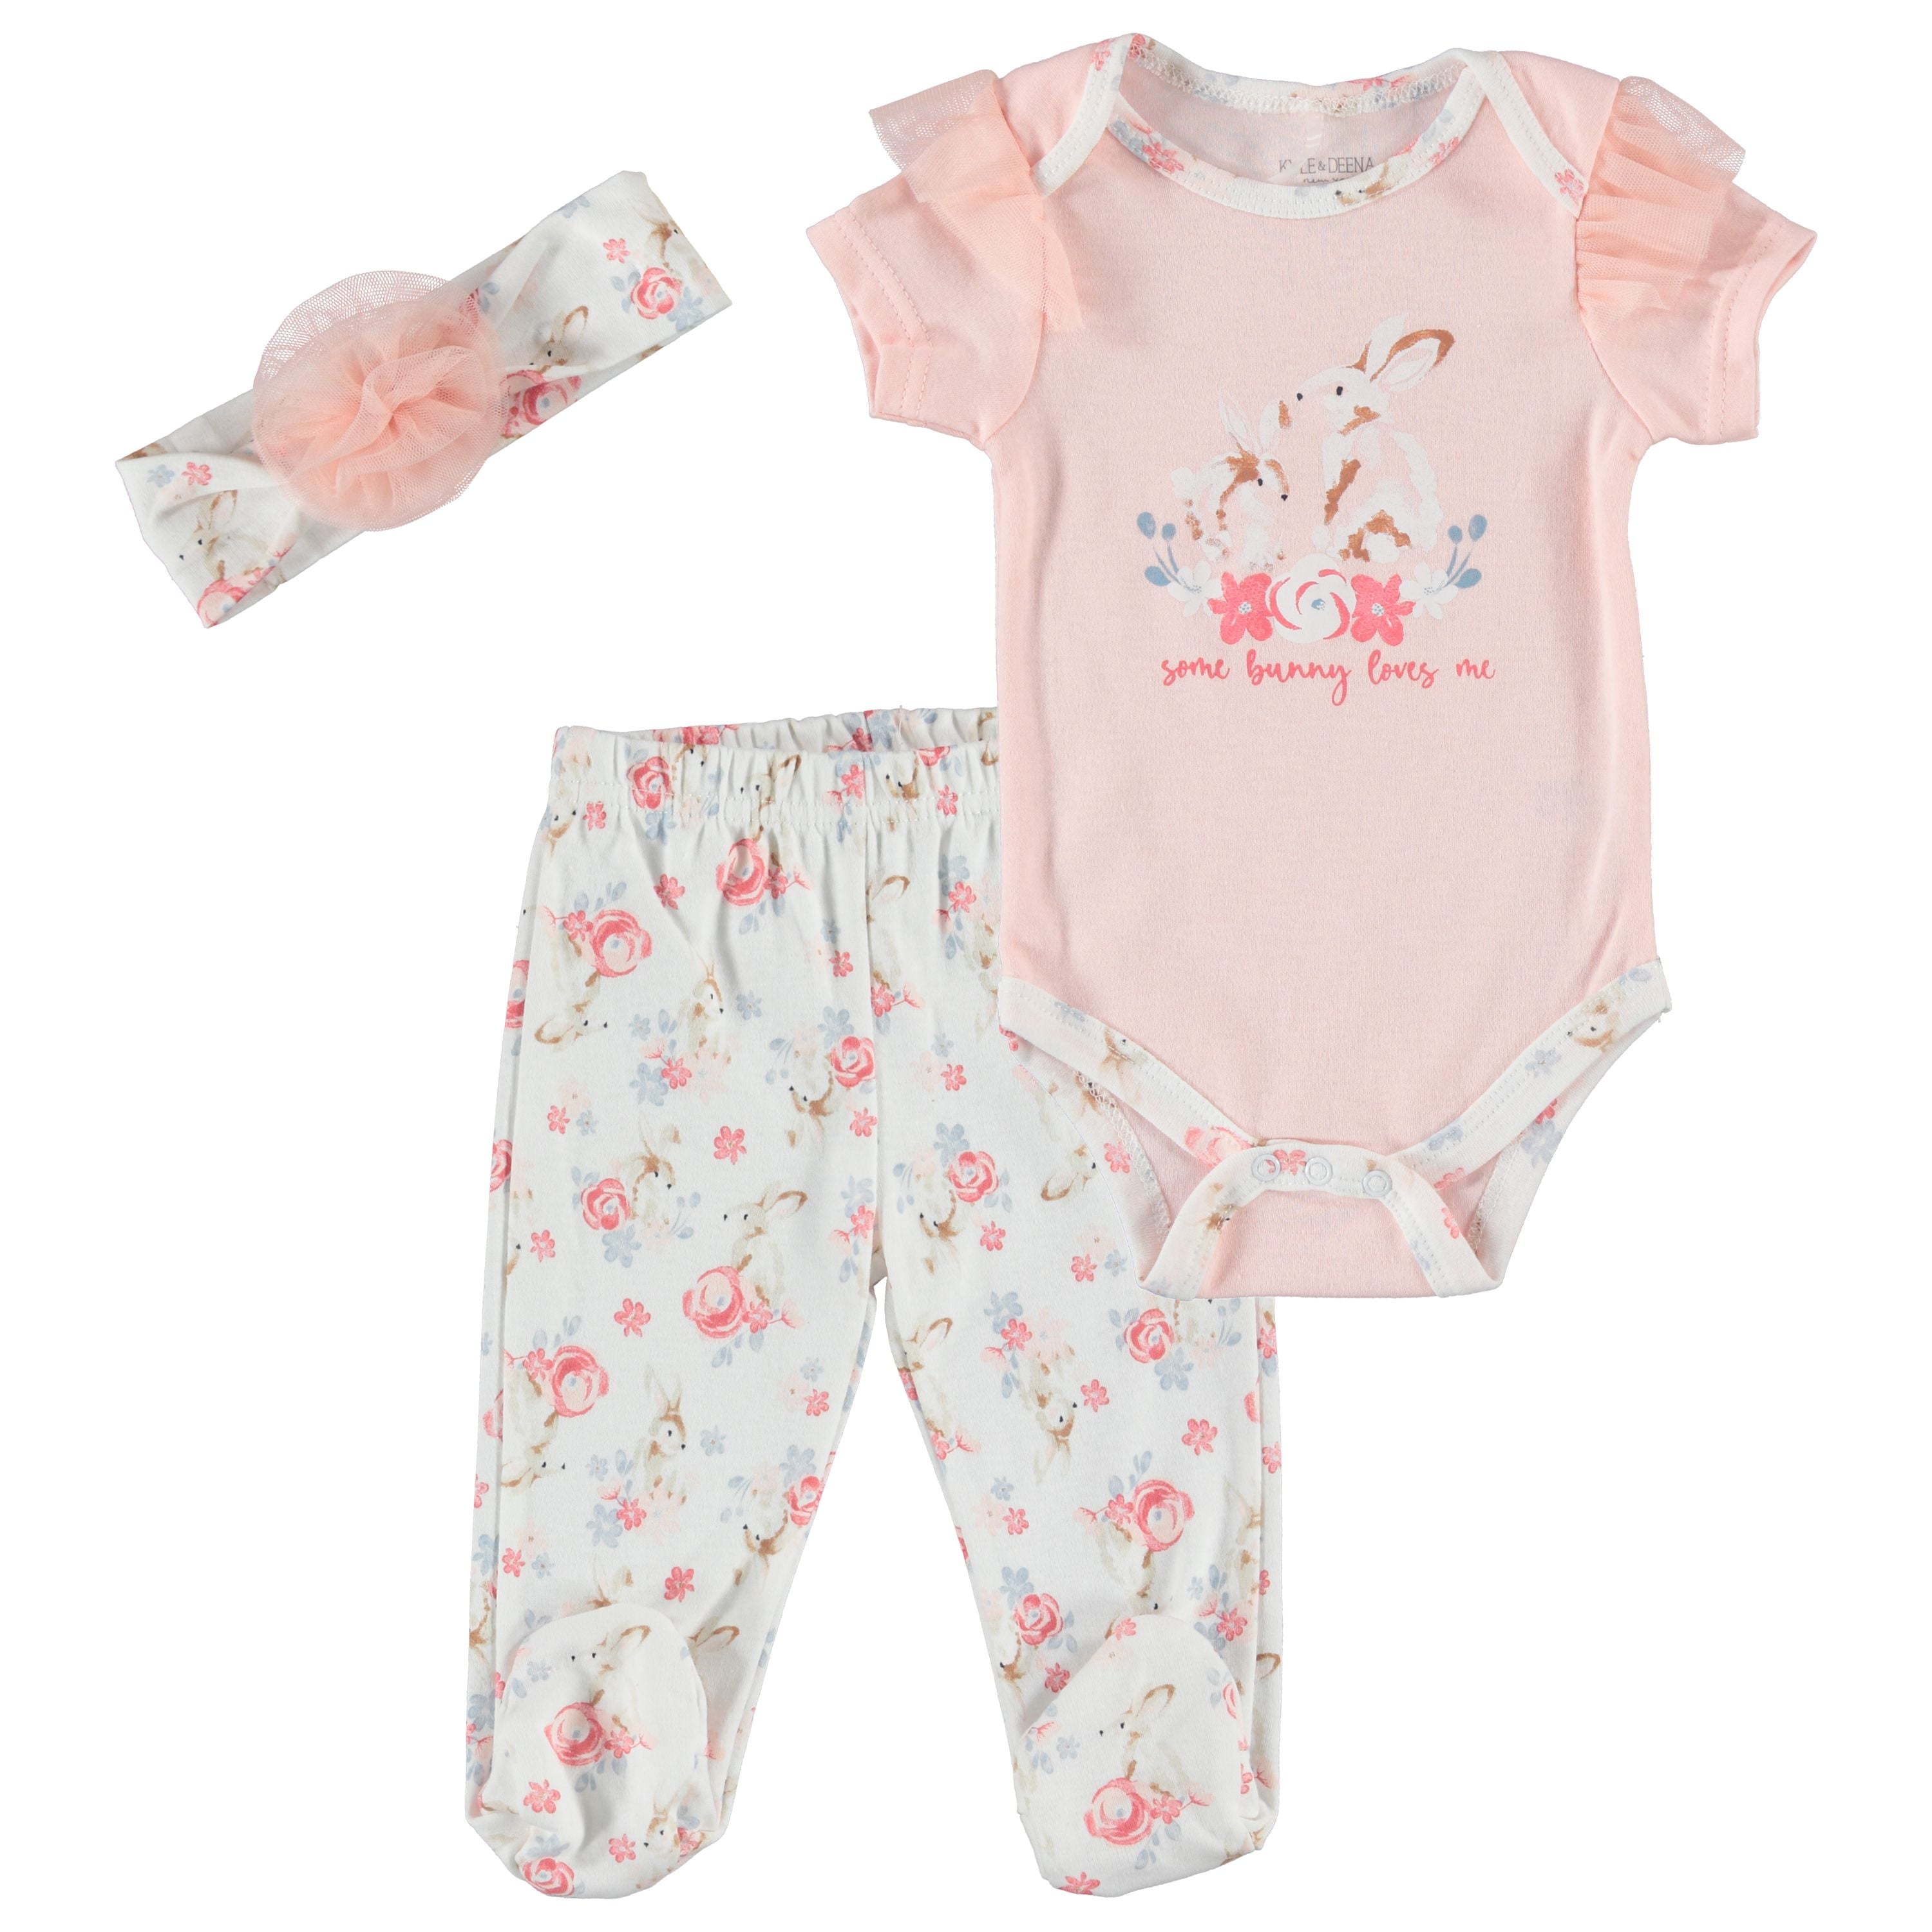 Kyle & Deena Baby Girl 3 PC Footed Pant Set, Sizes Newborn-9 Months ...